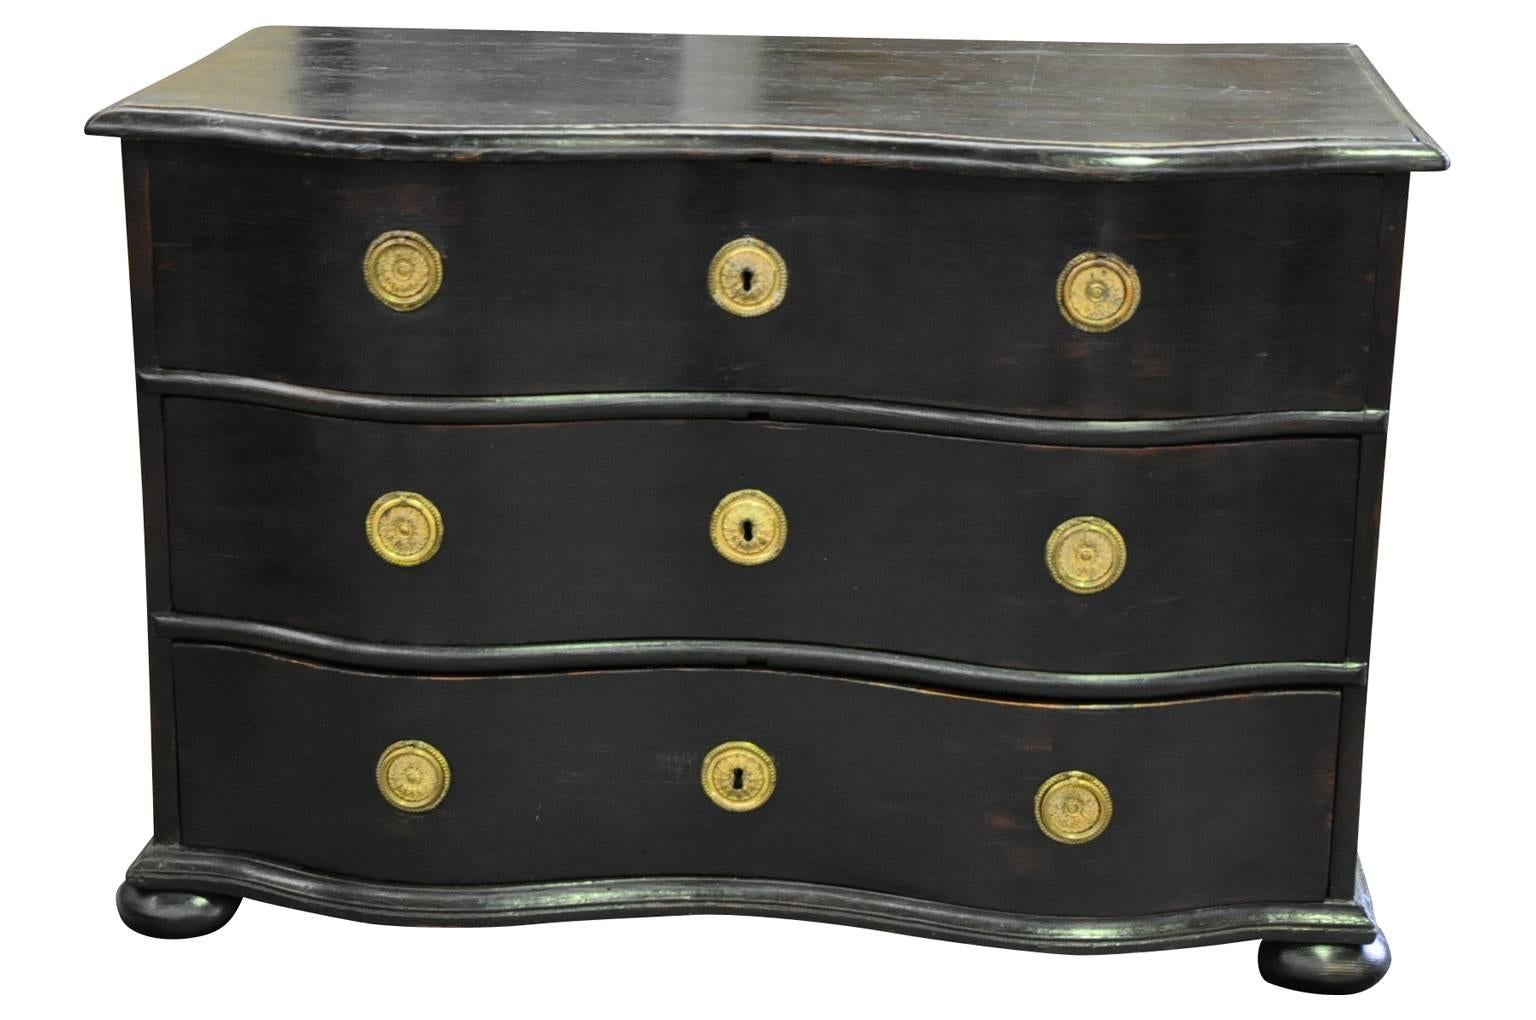 A very handsome and elegant 18th century Flemish commode in painted wood. Three drawers with beautiful serpentine movement raised on bun feet.